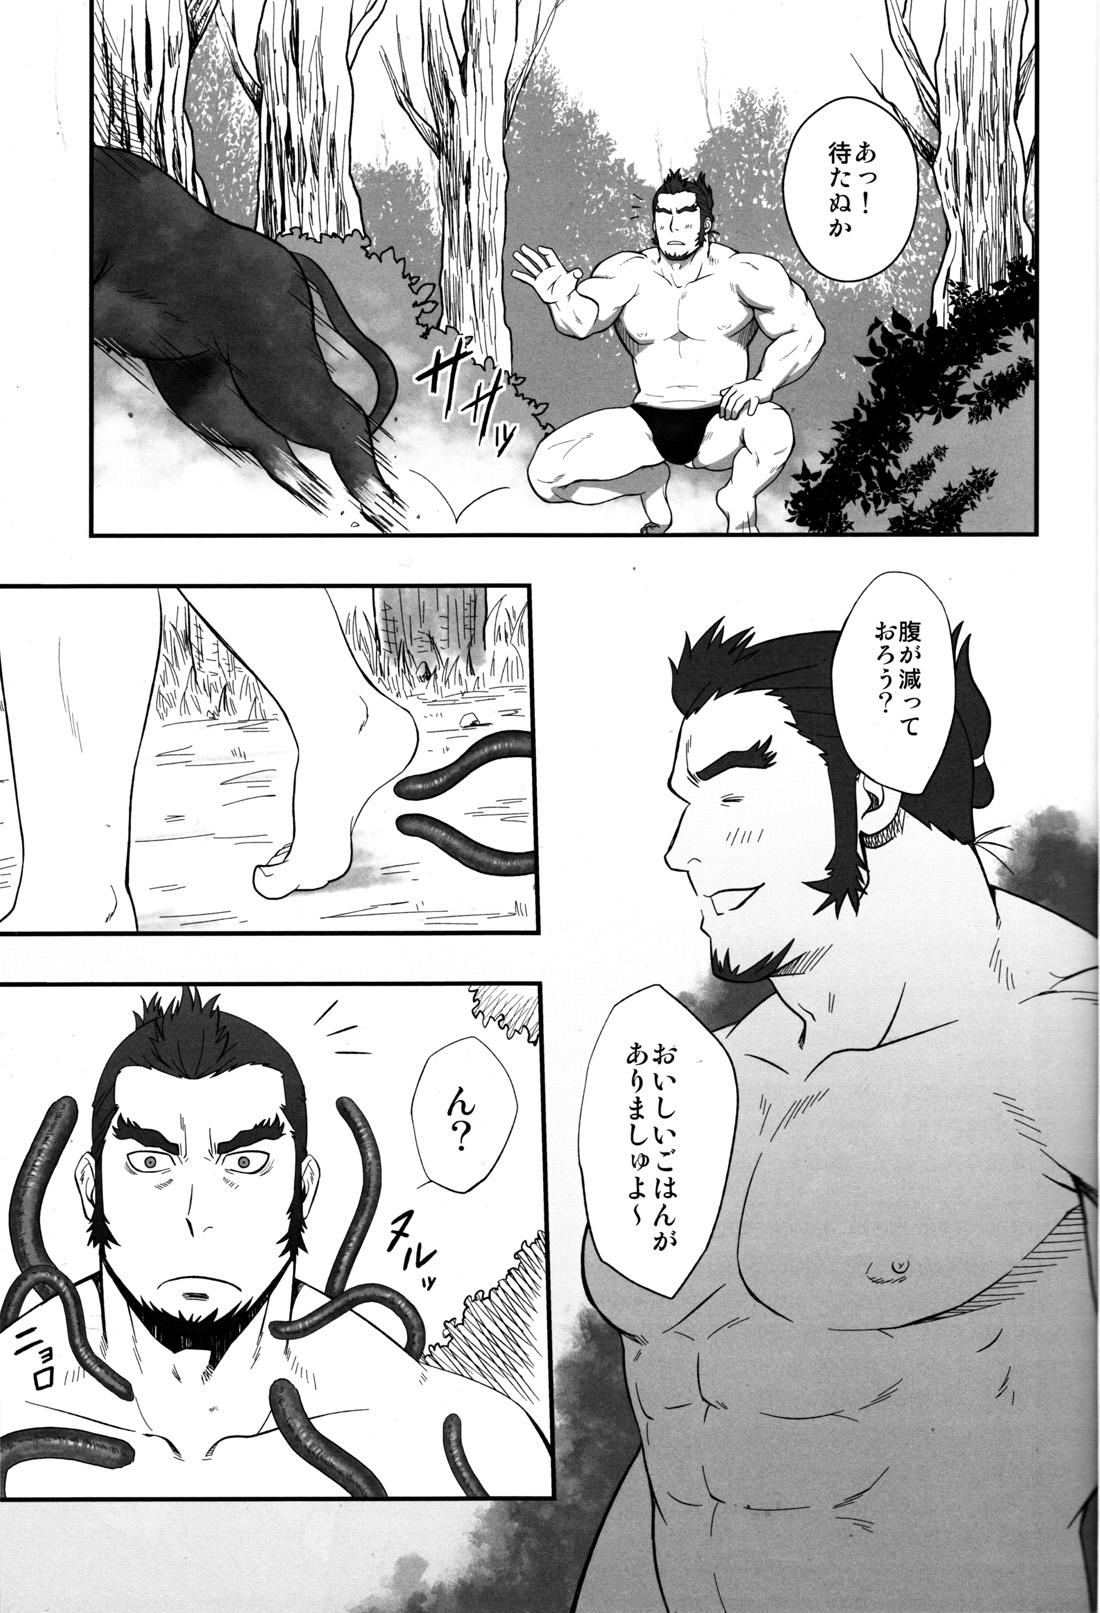 Glam GRATE HEAVEN - Ixion saga dt Humiliation - Page 6